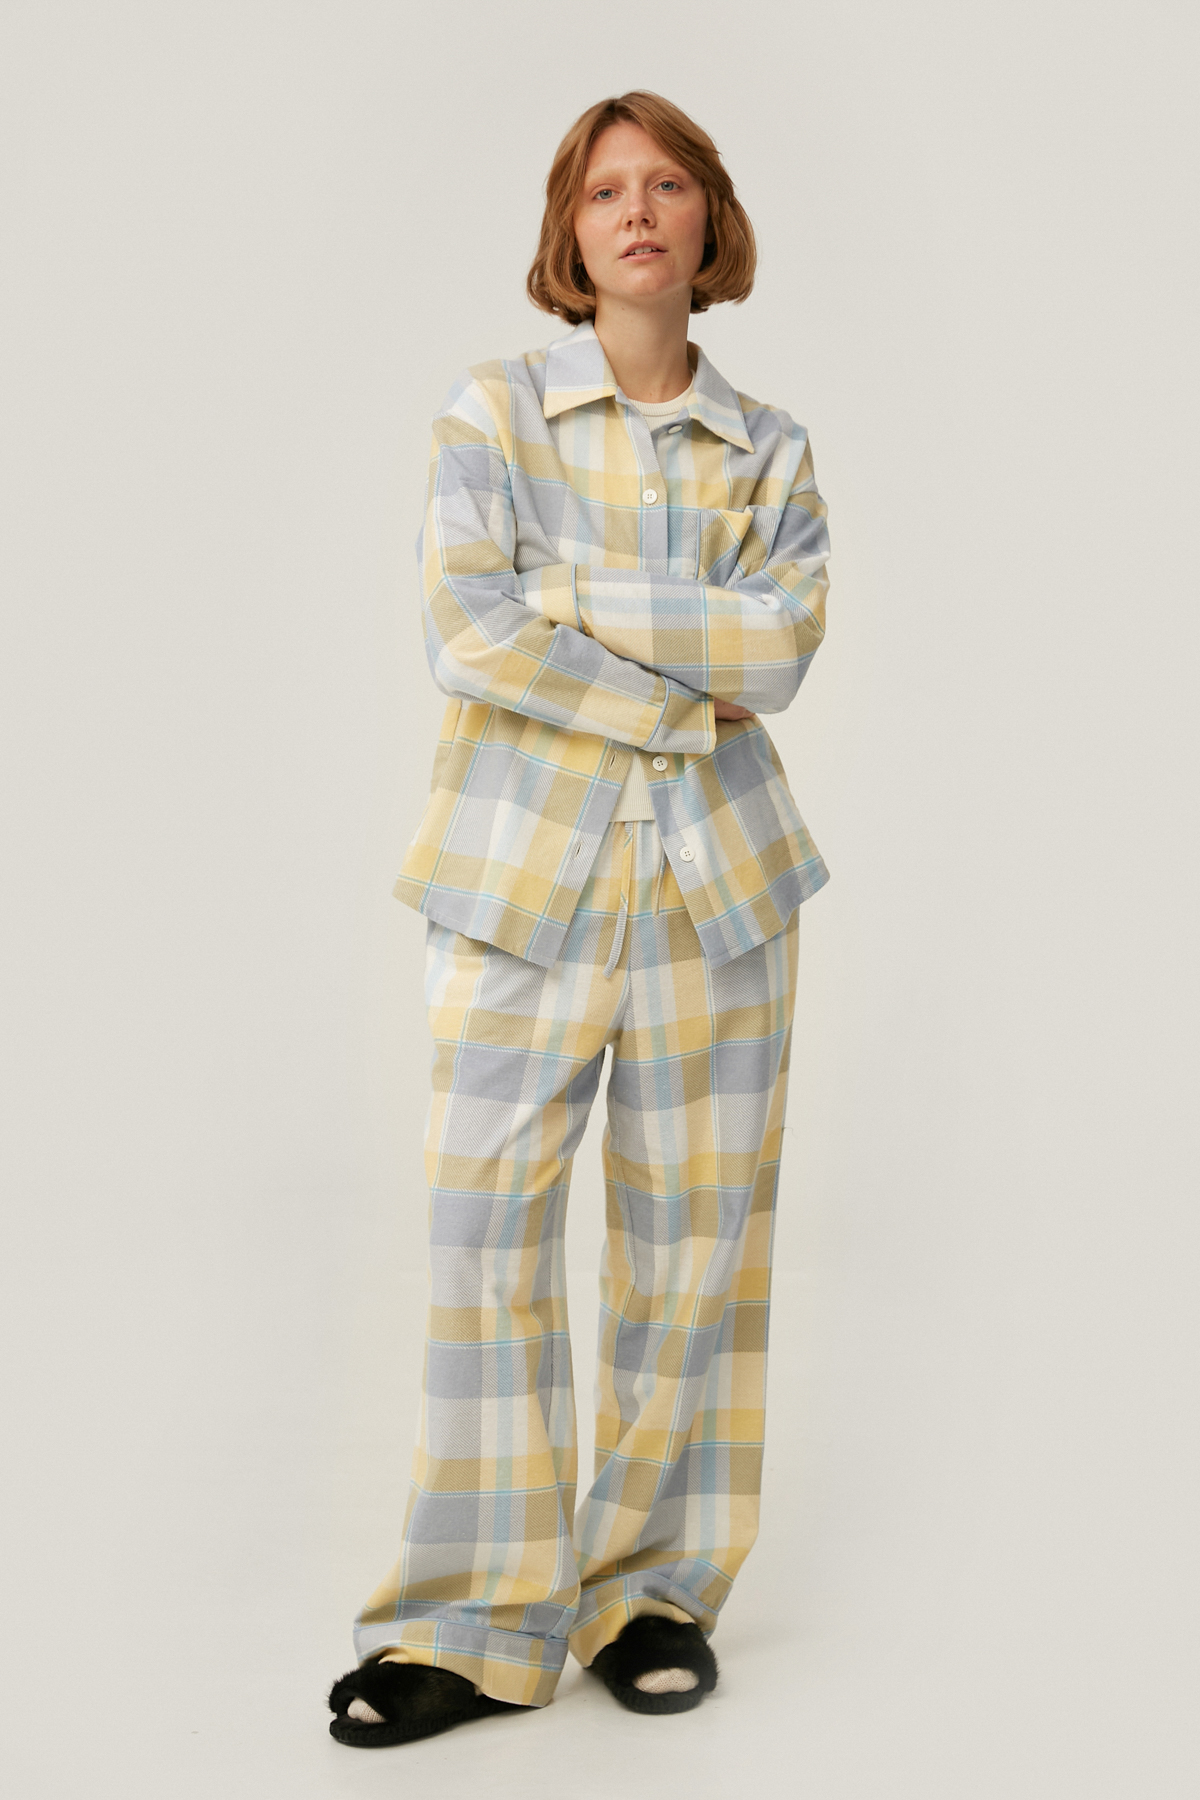 Pajama flanelette loose-fit pants in yellow and blue check, photo 2